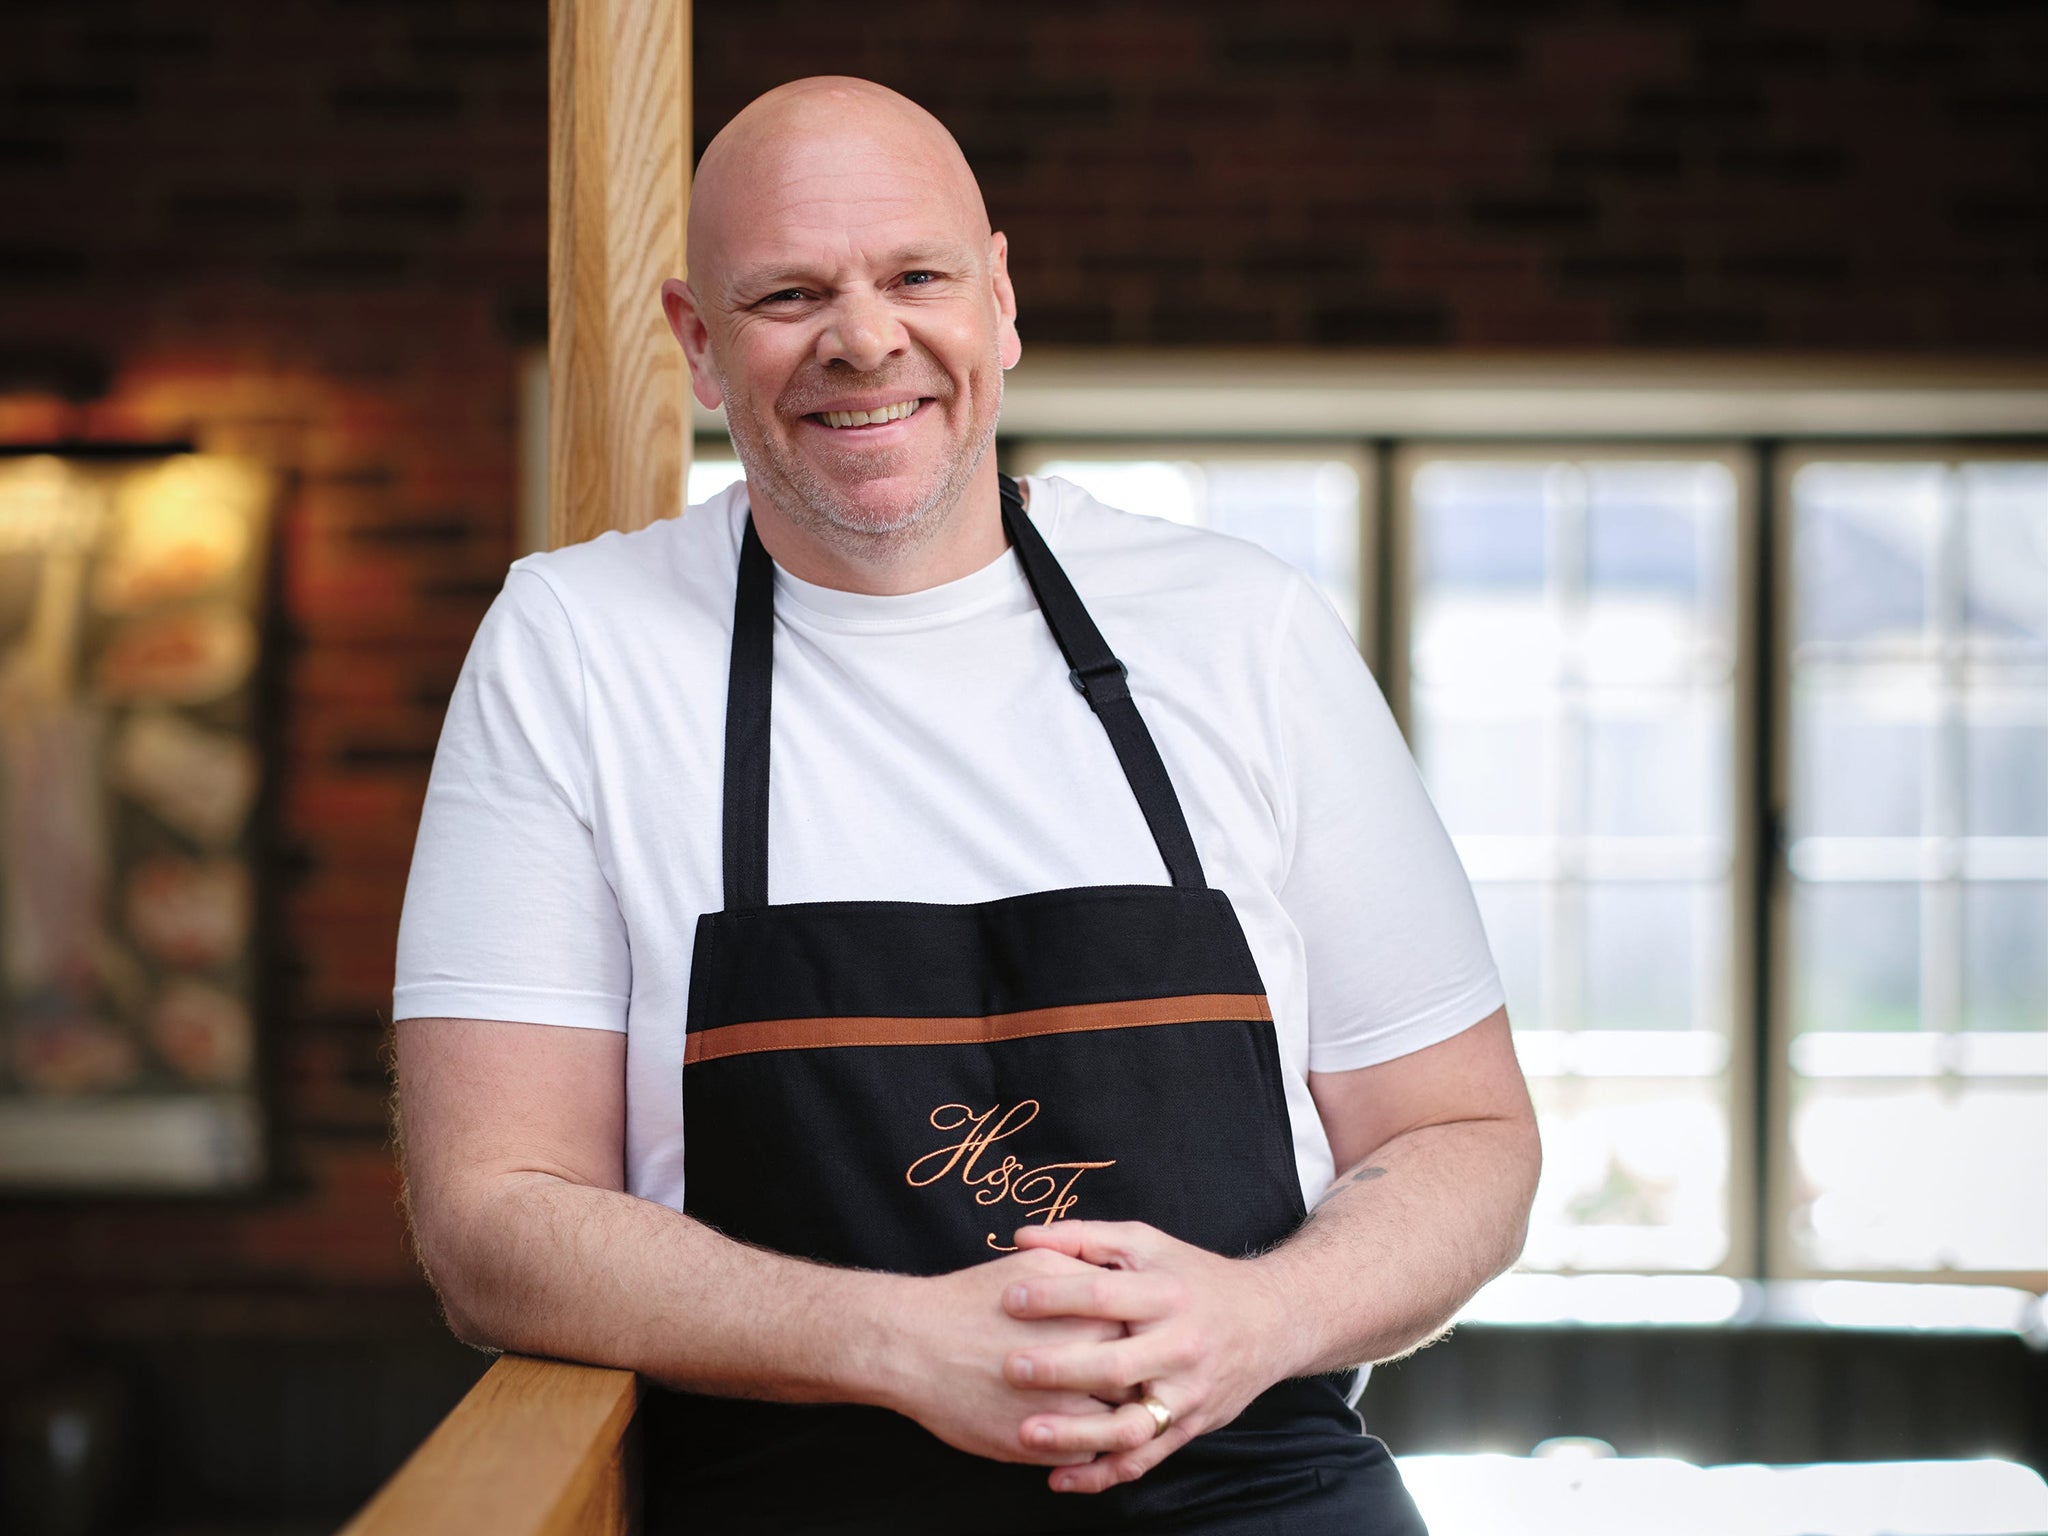 Kerridge says he’s stepped into more of a ‘coaching role’ at his restaurants